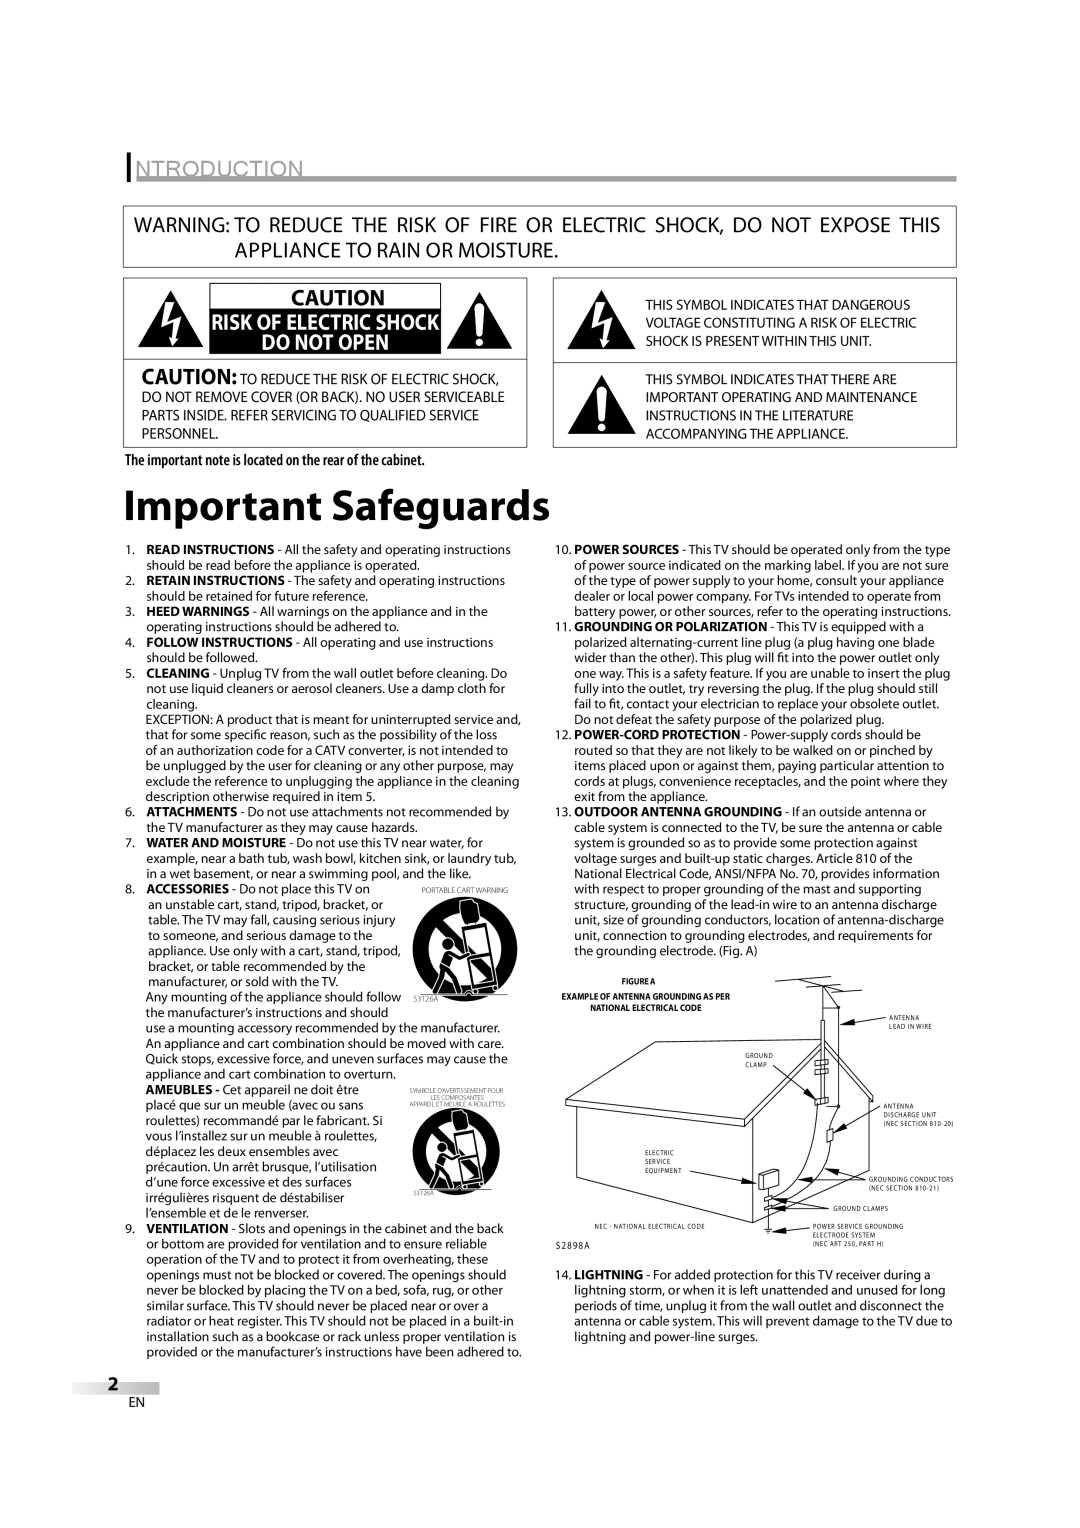 Sylvania CR202SL8 owner manual Introduction, Important Safeguards, Risk Of Electric Shock Do Not Open 